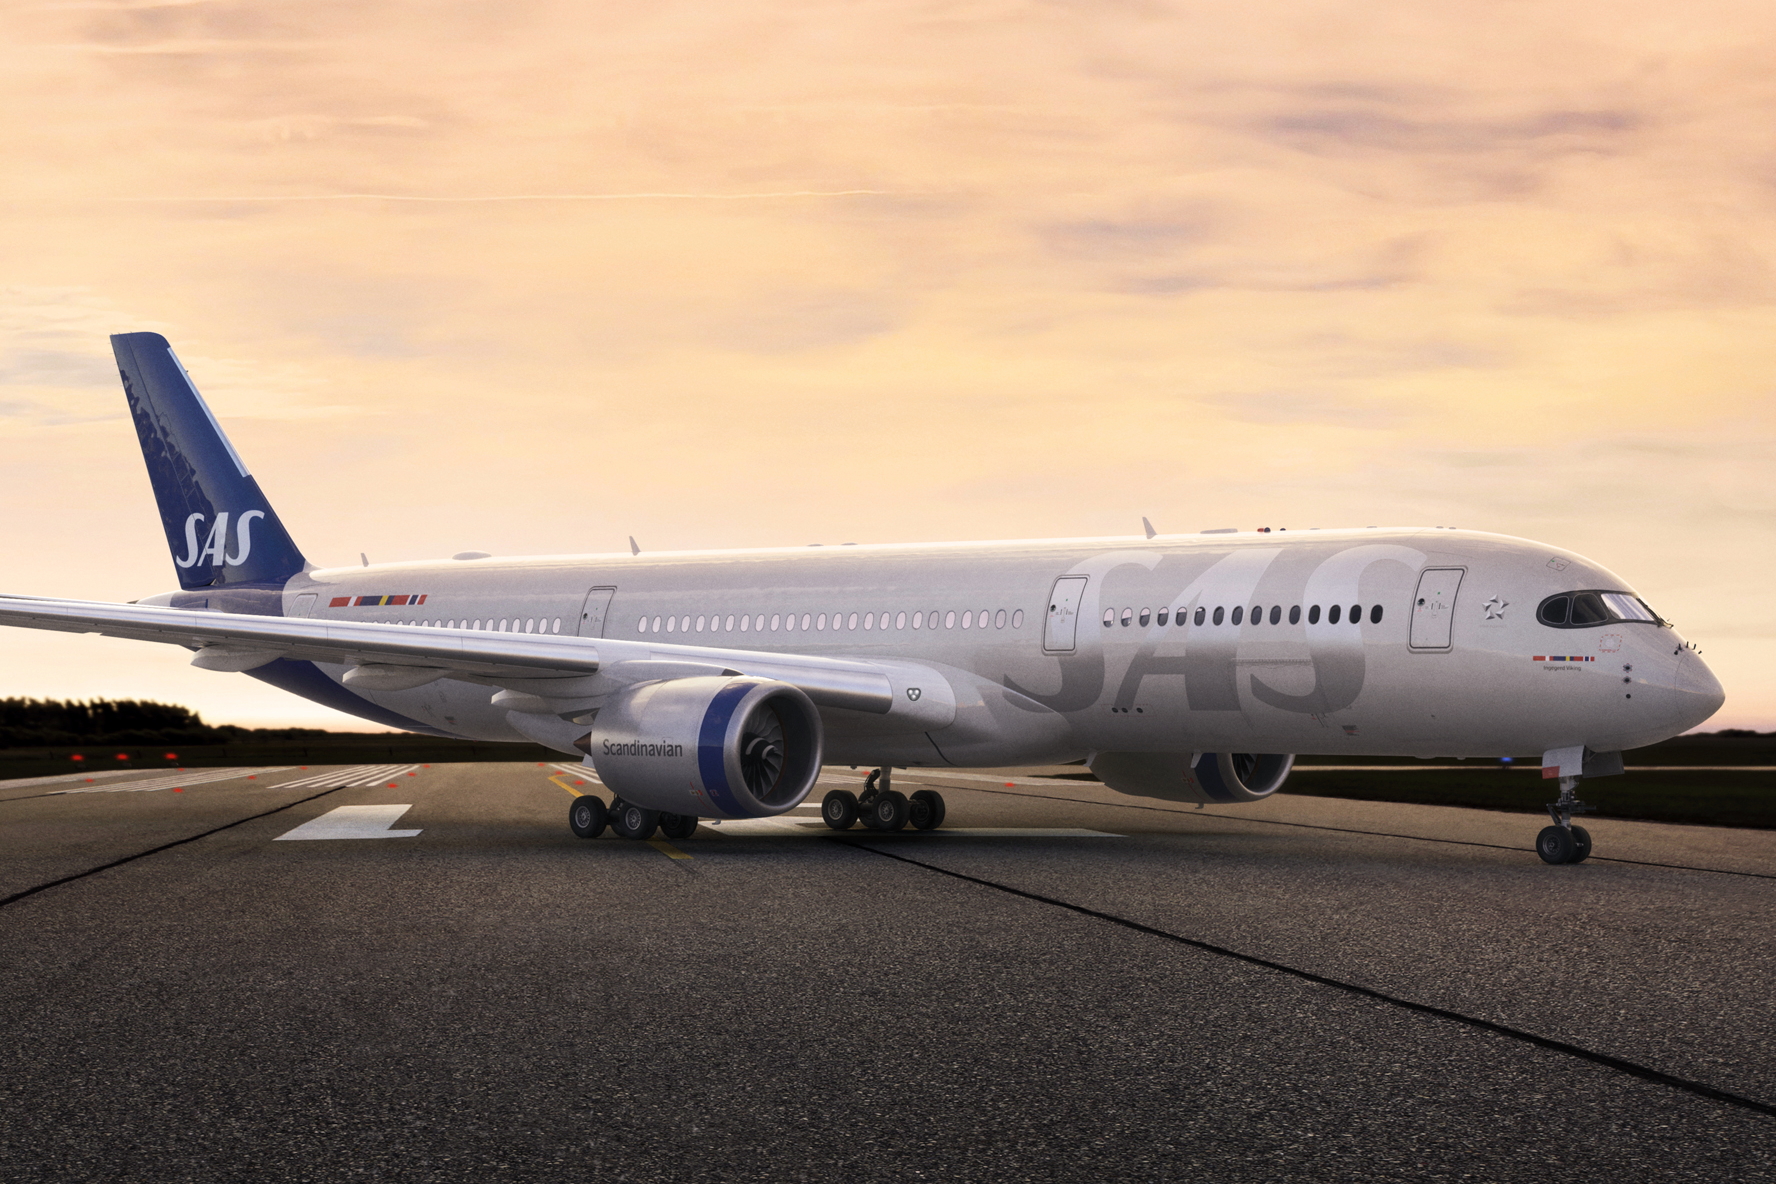 SAS has unveiled its first new aircraft livery in 21 years. The new livery extends the blue color of the tail further down the fuselage and onto the engine, while a big silver SAS logo has been added to the front side of the aircraft. Click to enlarge.